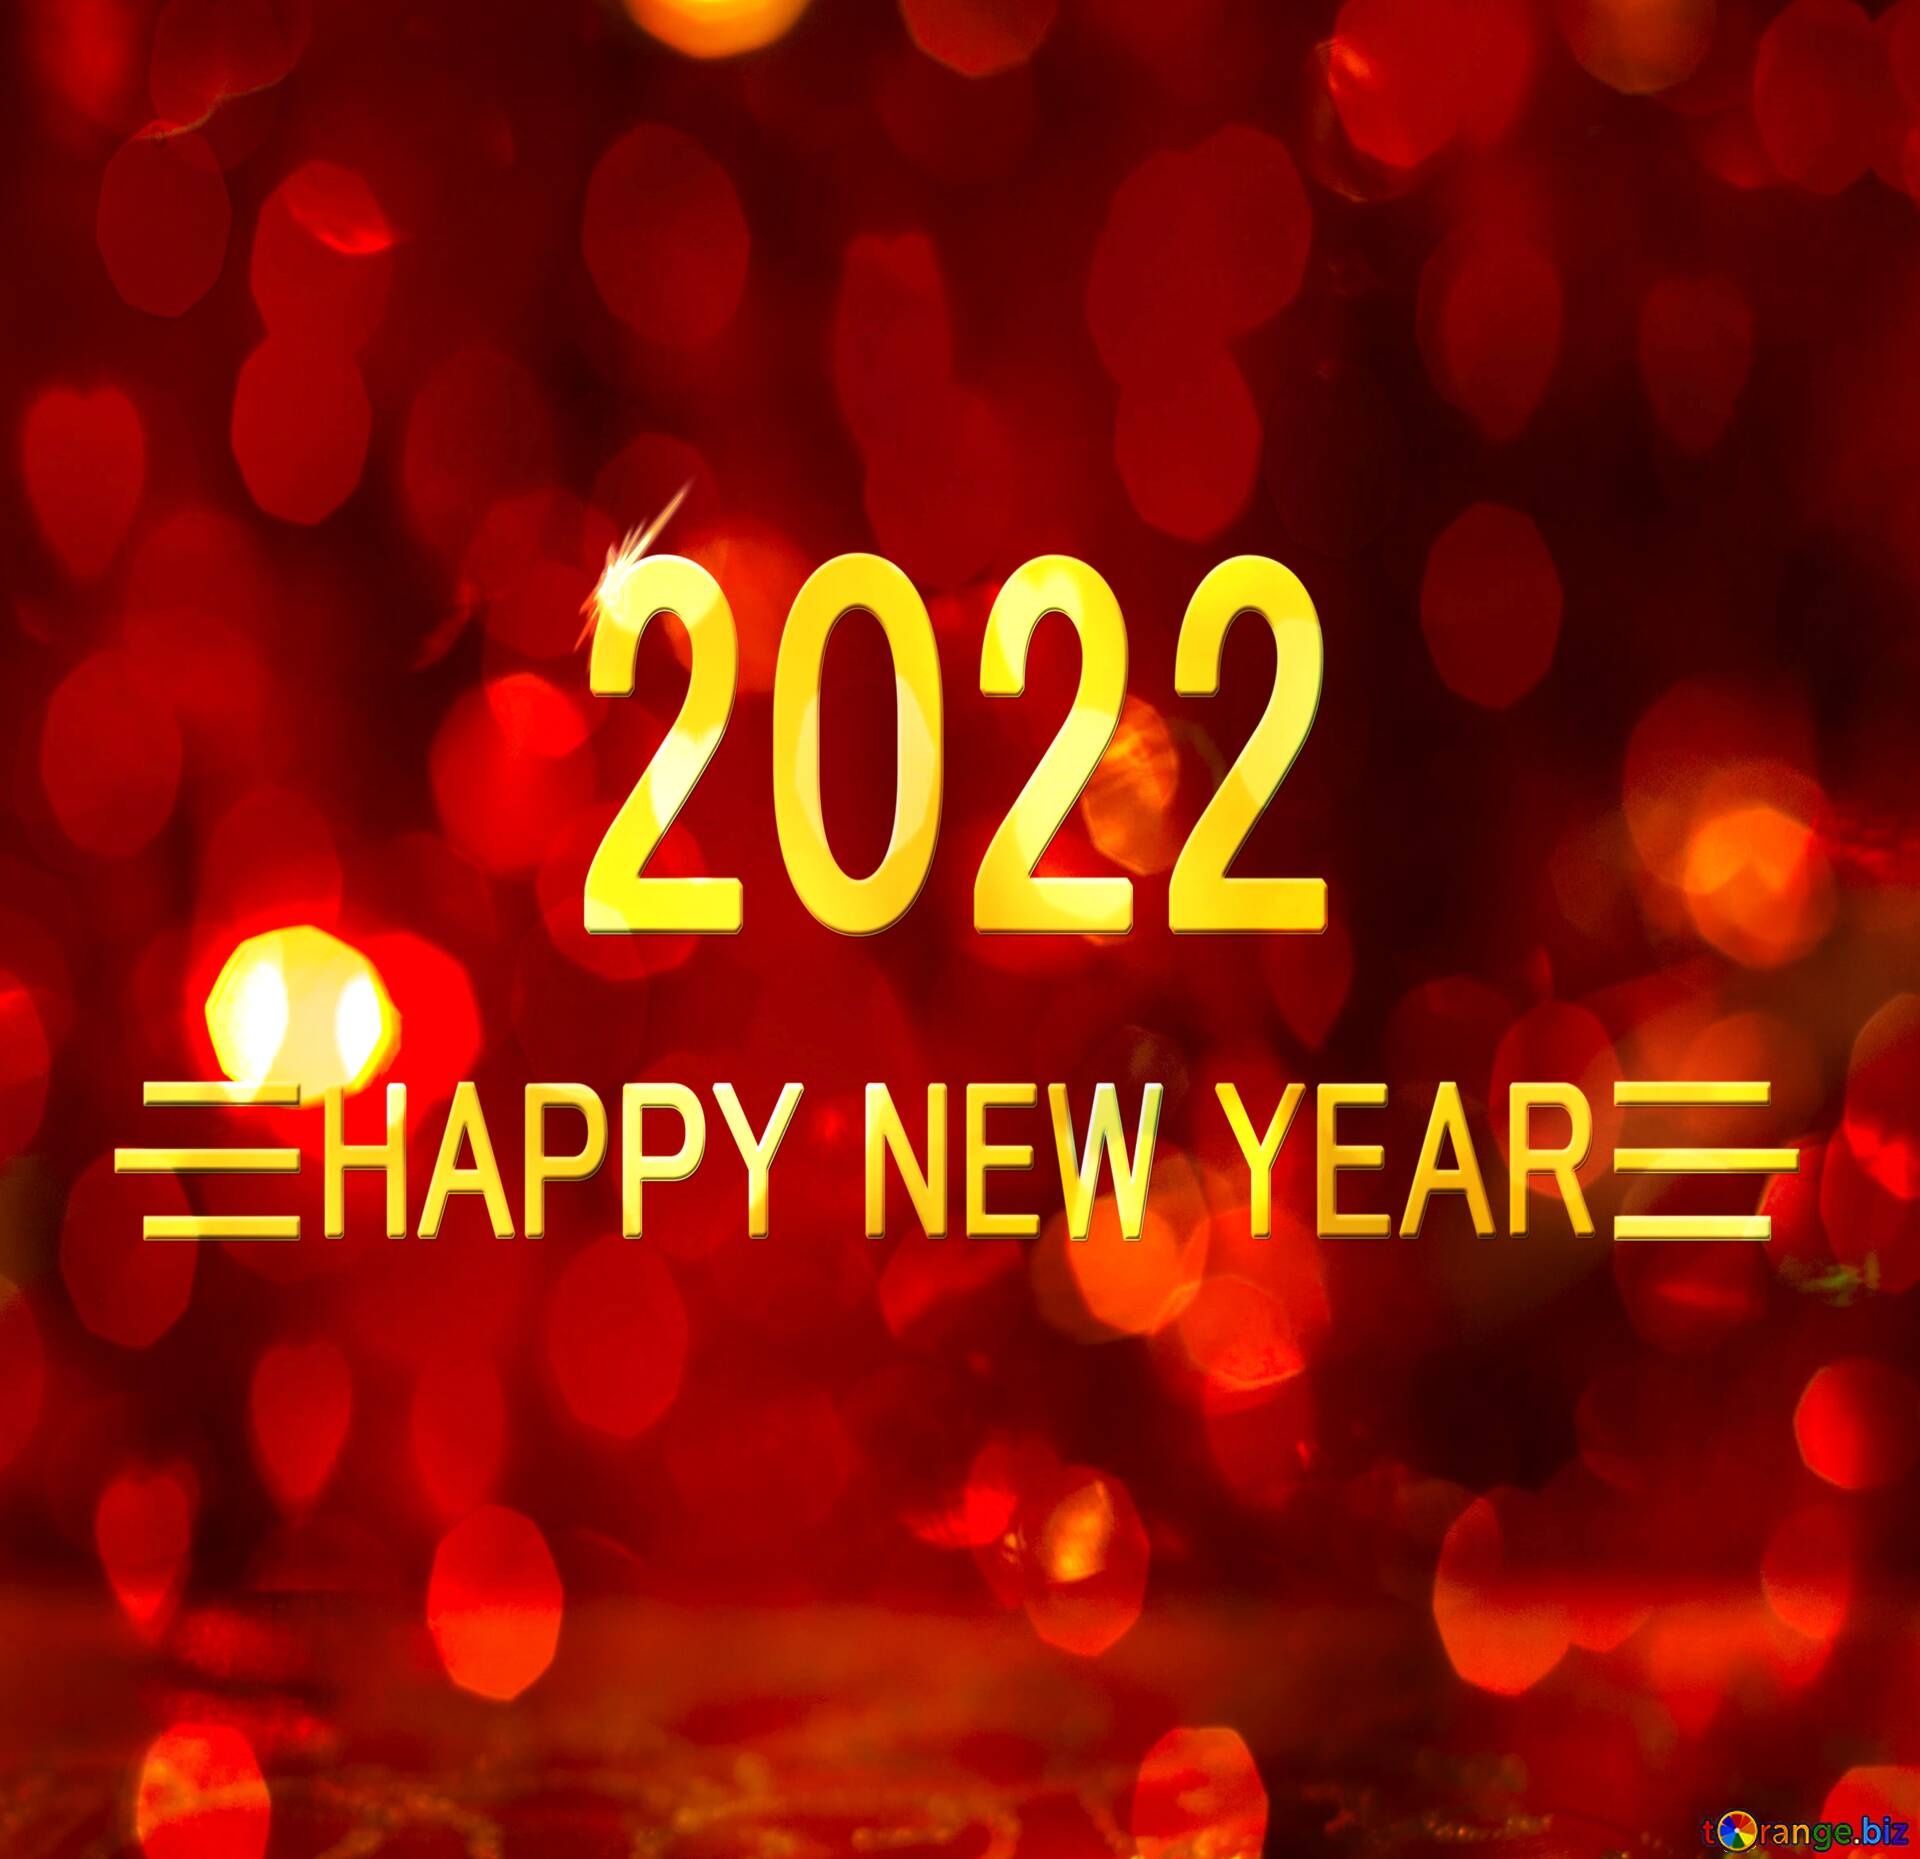 Download Free Picture Christmas Happy New Year 2022 Background On CC BY License Free Image Stock TOrange.biz Fx №212307